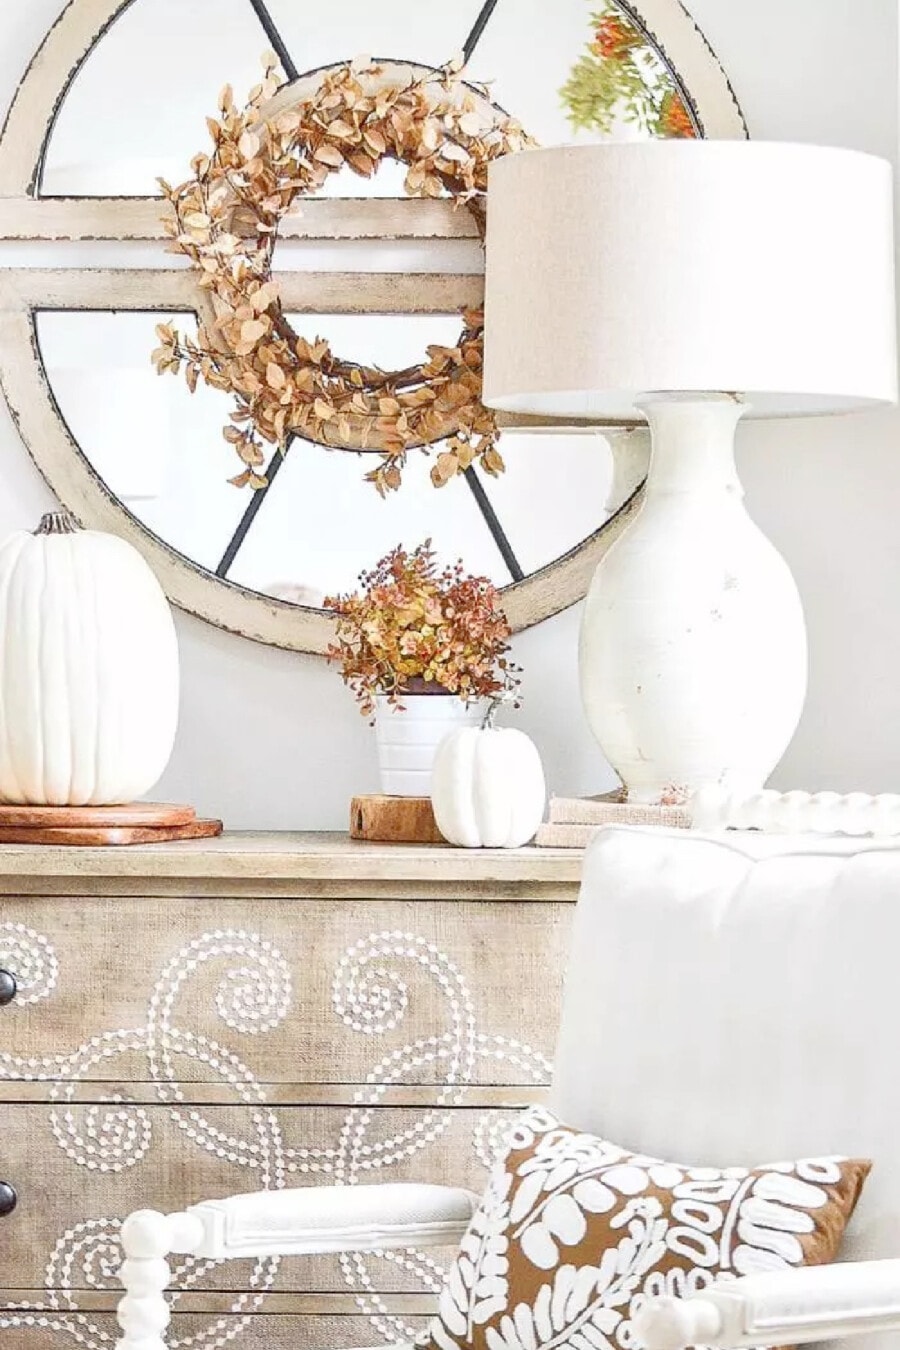 Fall Decorating, Fall Bedroom Ideas, Fall Tablescape, Butternut Squash Recipes, And A Home Tour